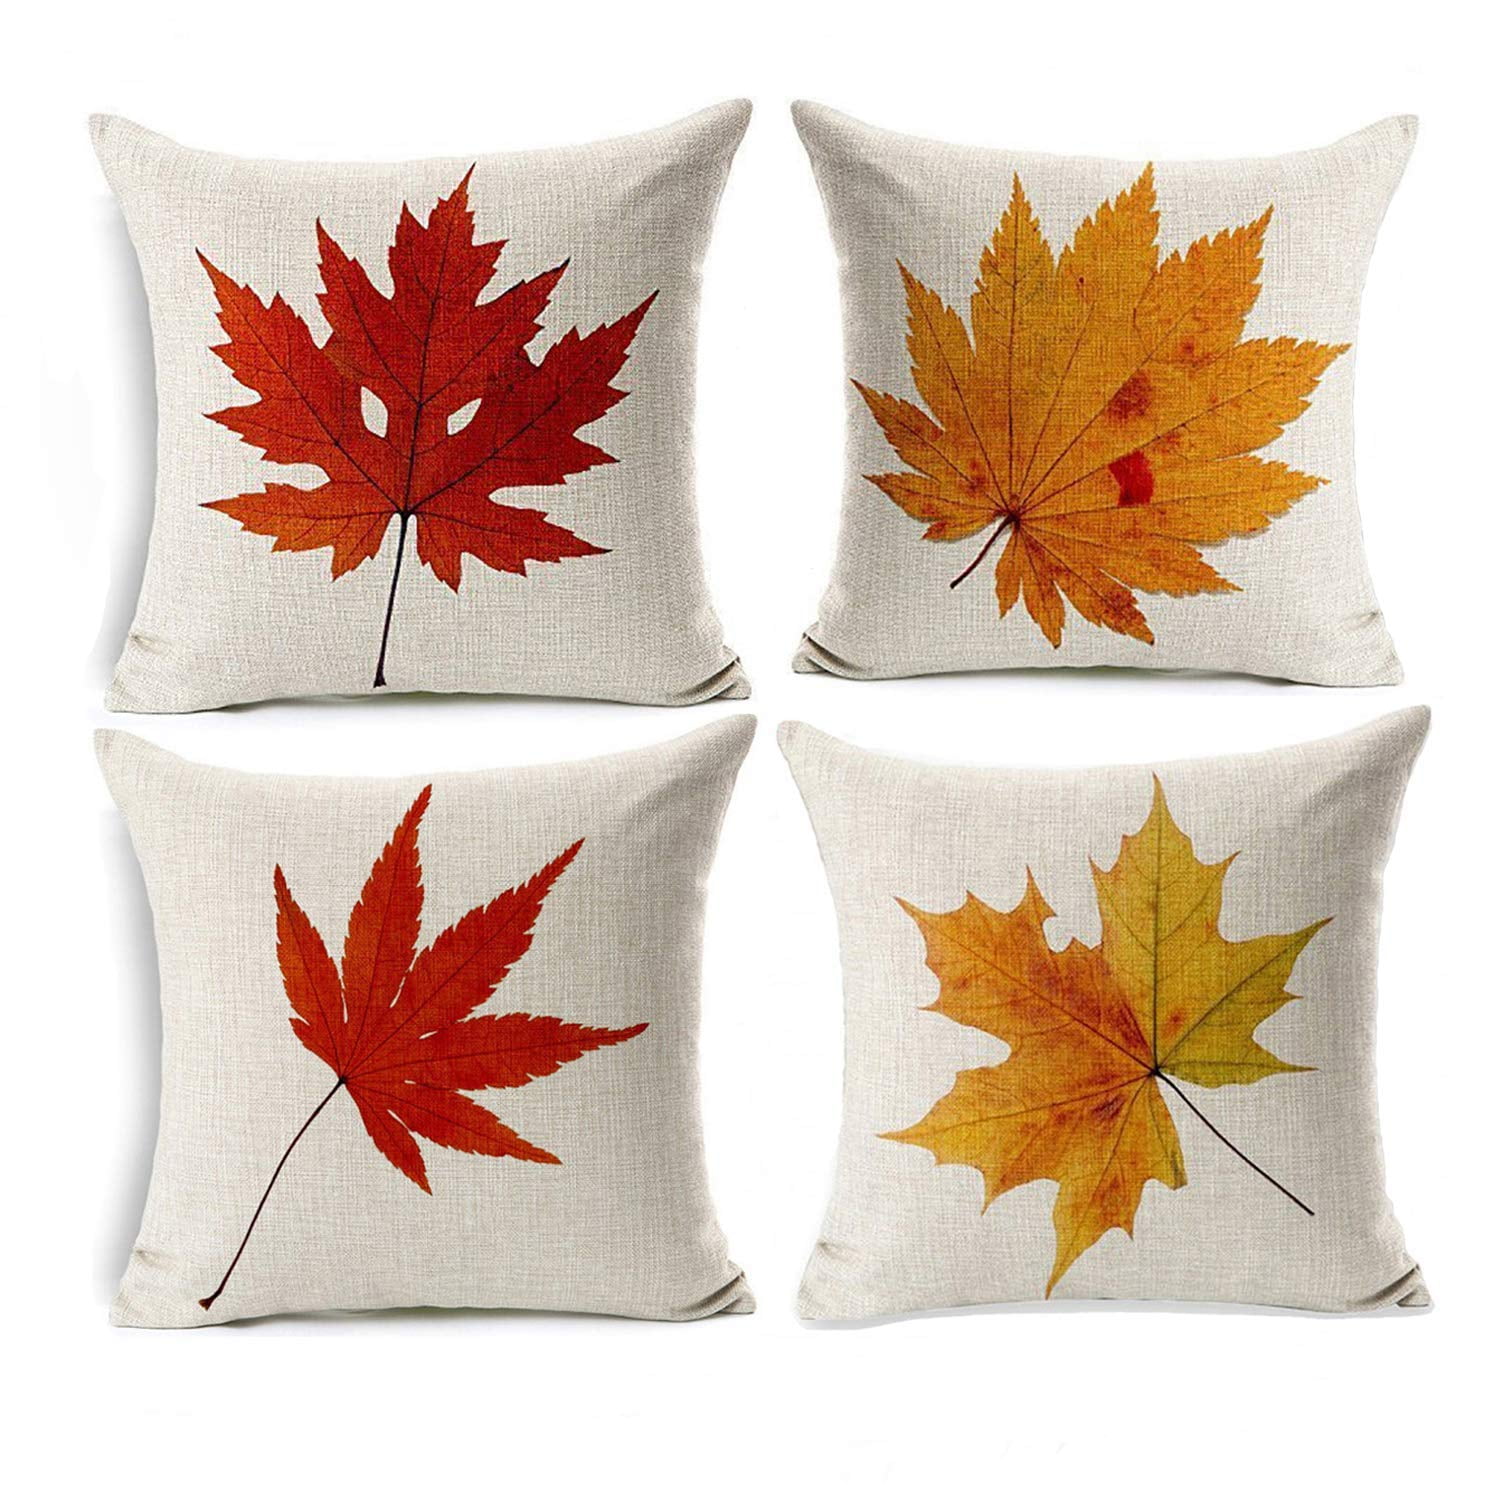 Bnitoam Maple leaf pumpkin harvest season Happy fall Hello autumn Its time for love Cotton Linen Throw Pillow covers Case Cushion Cover Sofa Decorative Square 18 x 18 inch 4 